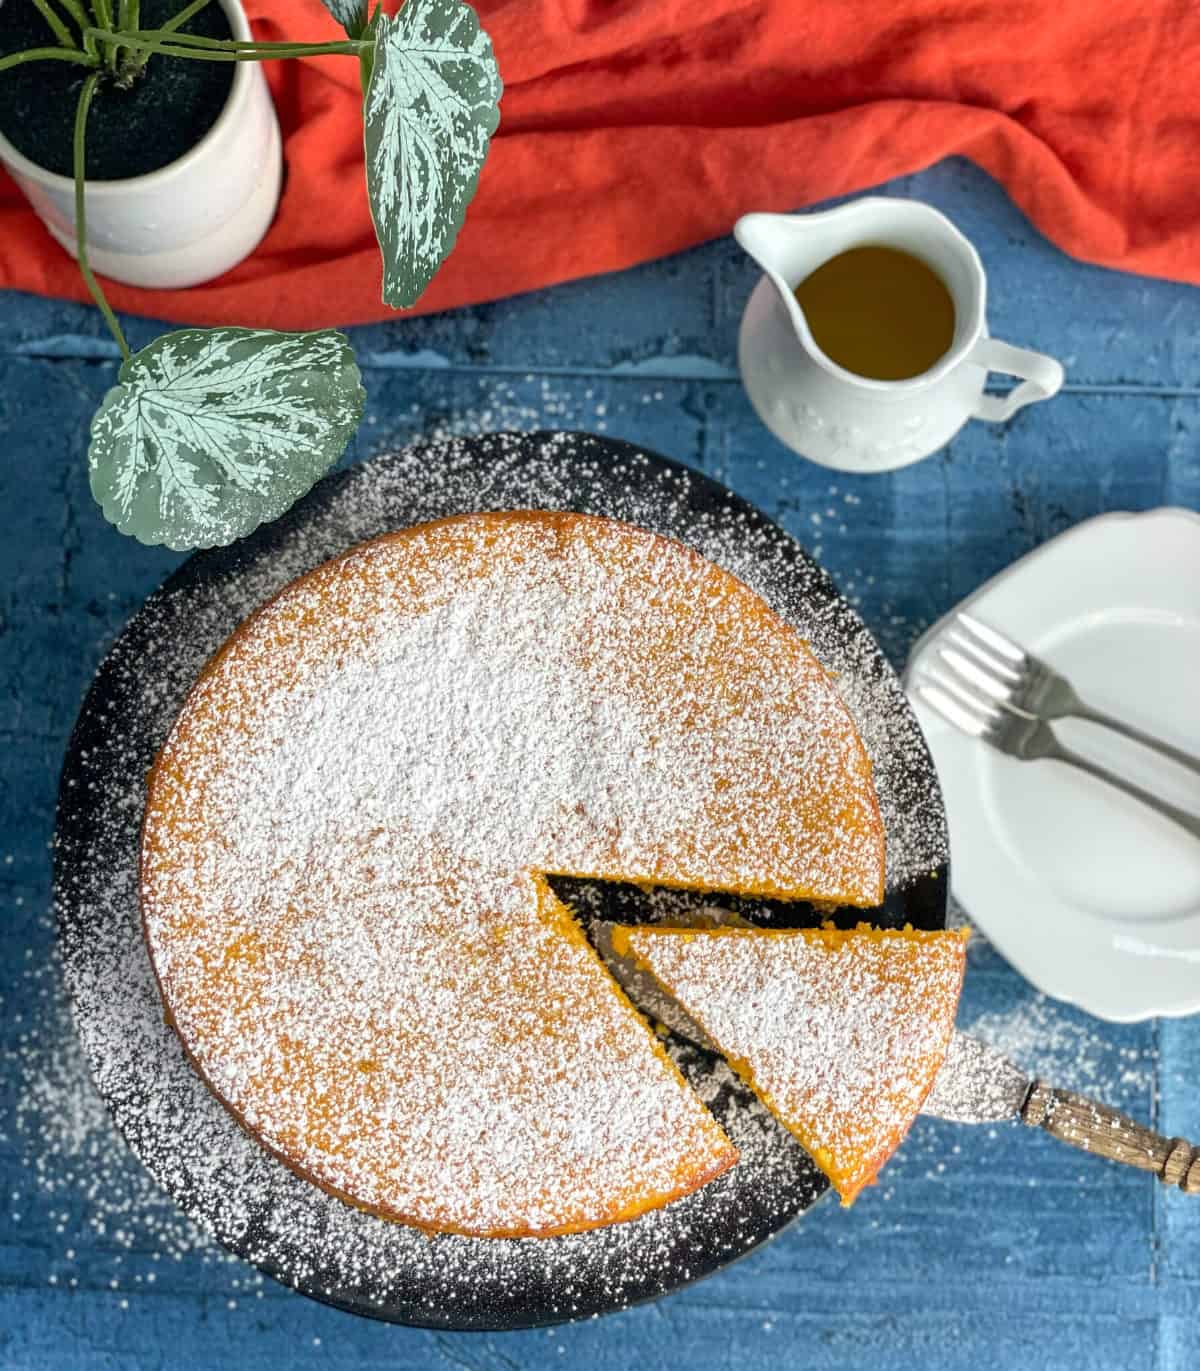 A orange and almond cake on a black cake stand dusted in icing sugar